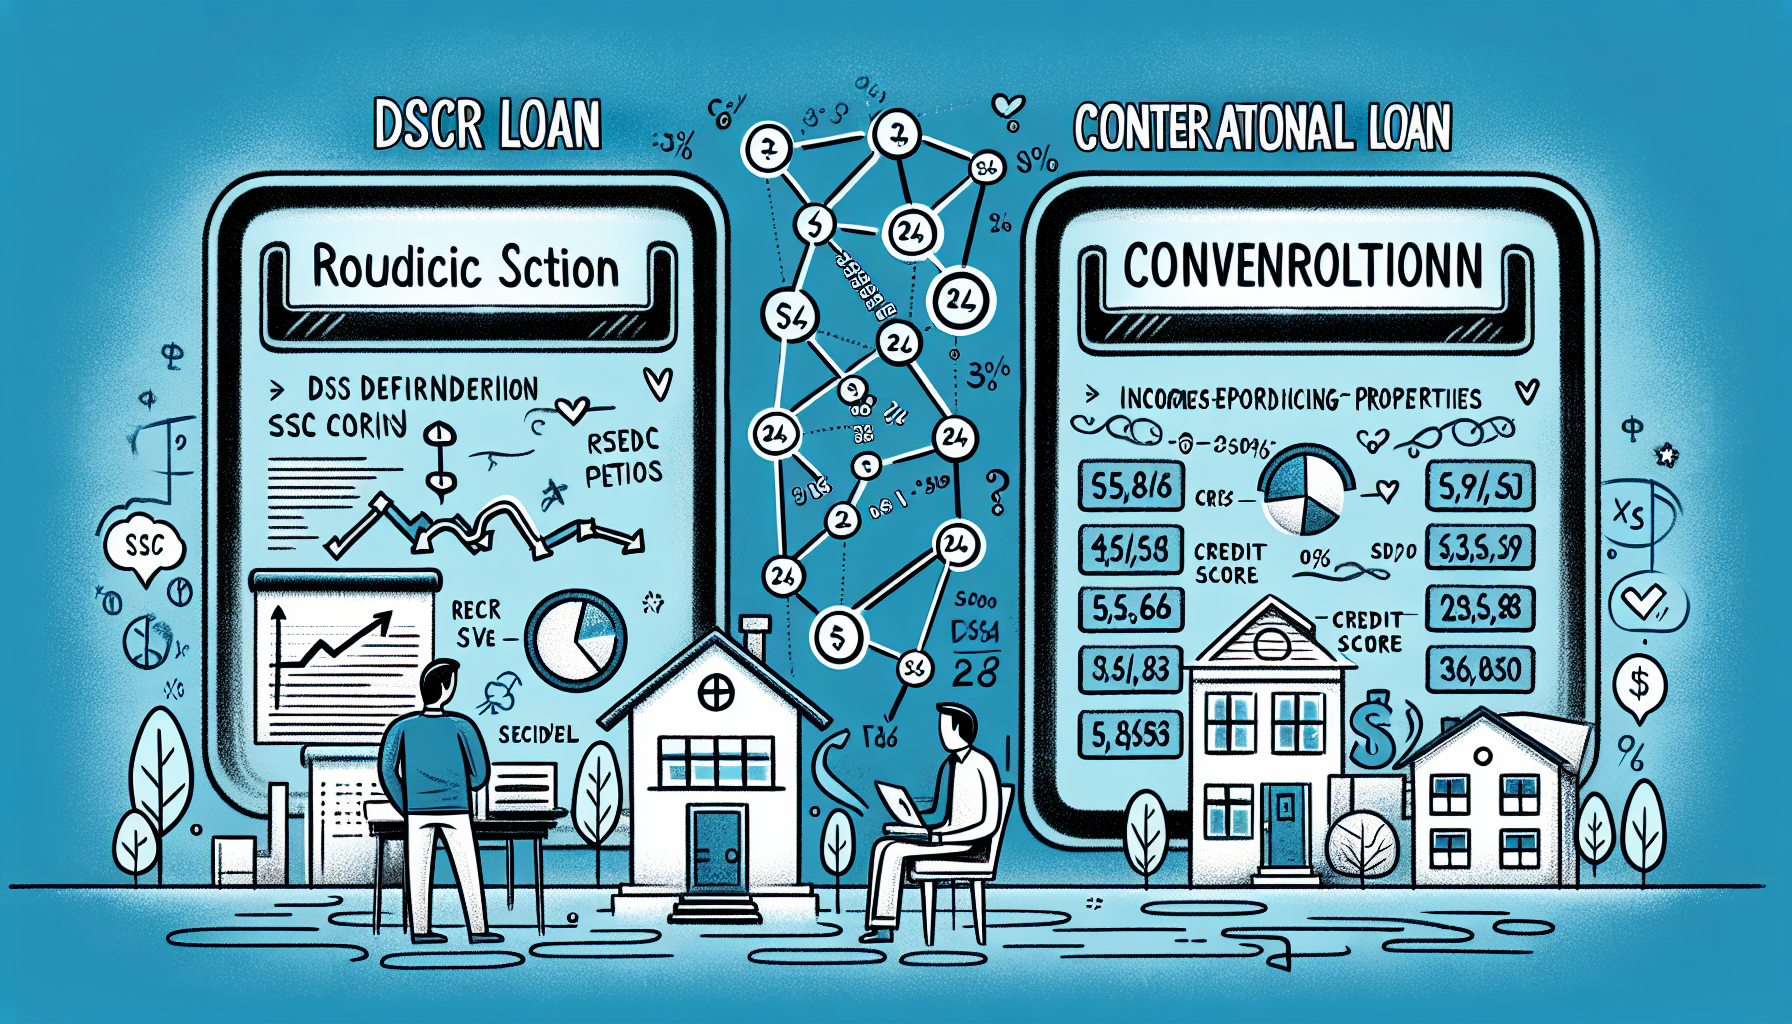 Comparison between DSCR loans and conventional loans